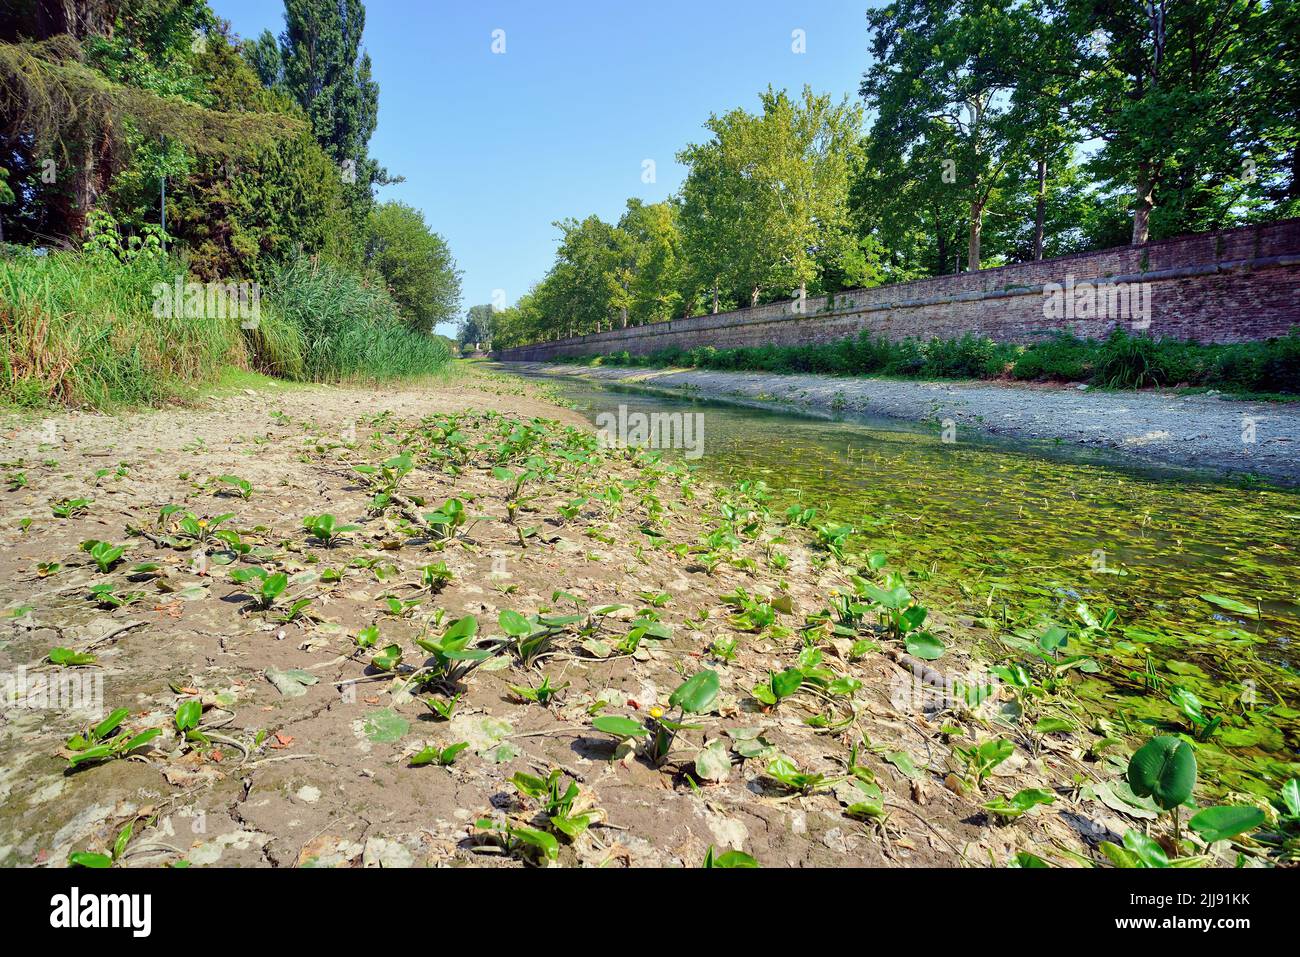 Padua, Veneto, Italy. The master branch of the Bacchiglione river in low water, The drought affecting Northern Italy shows no sign of abating. After 200 days without rain and a winter without snow, the level of the rivers is at an all-time low. Serious damage to agriculture. The river level has dropped several meters. The river bed is almost dry. Stock Photo